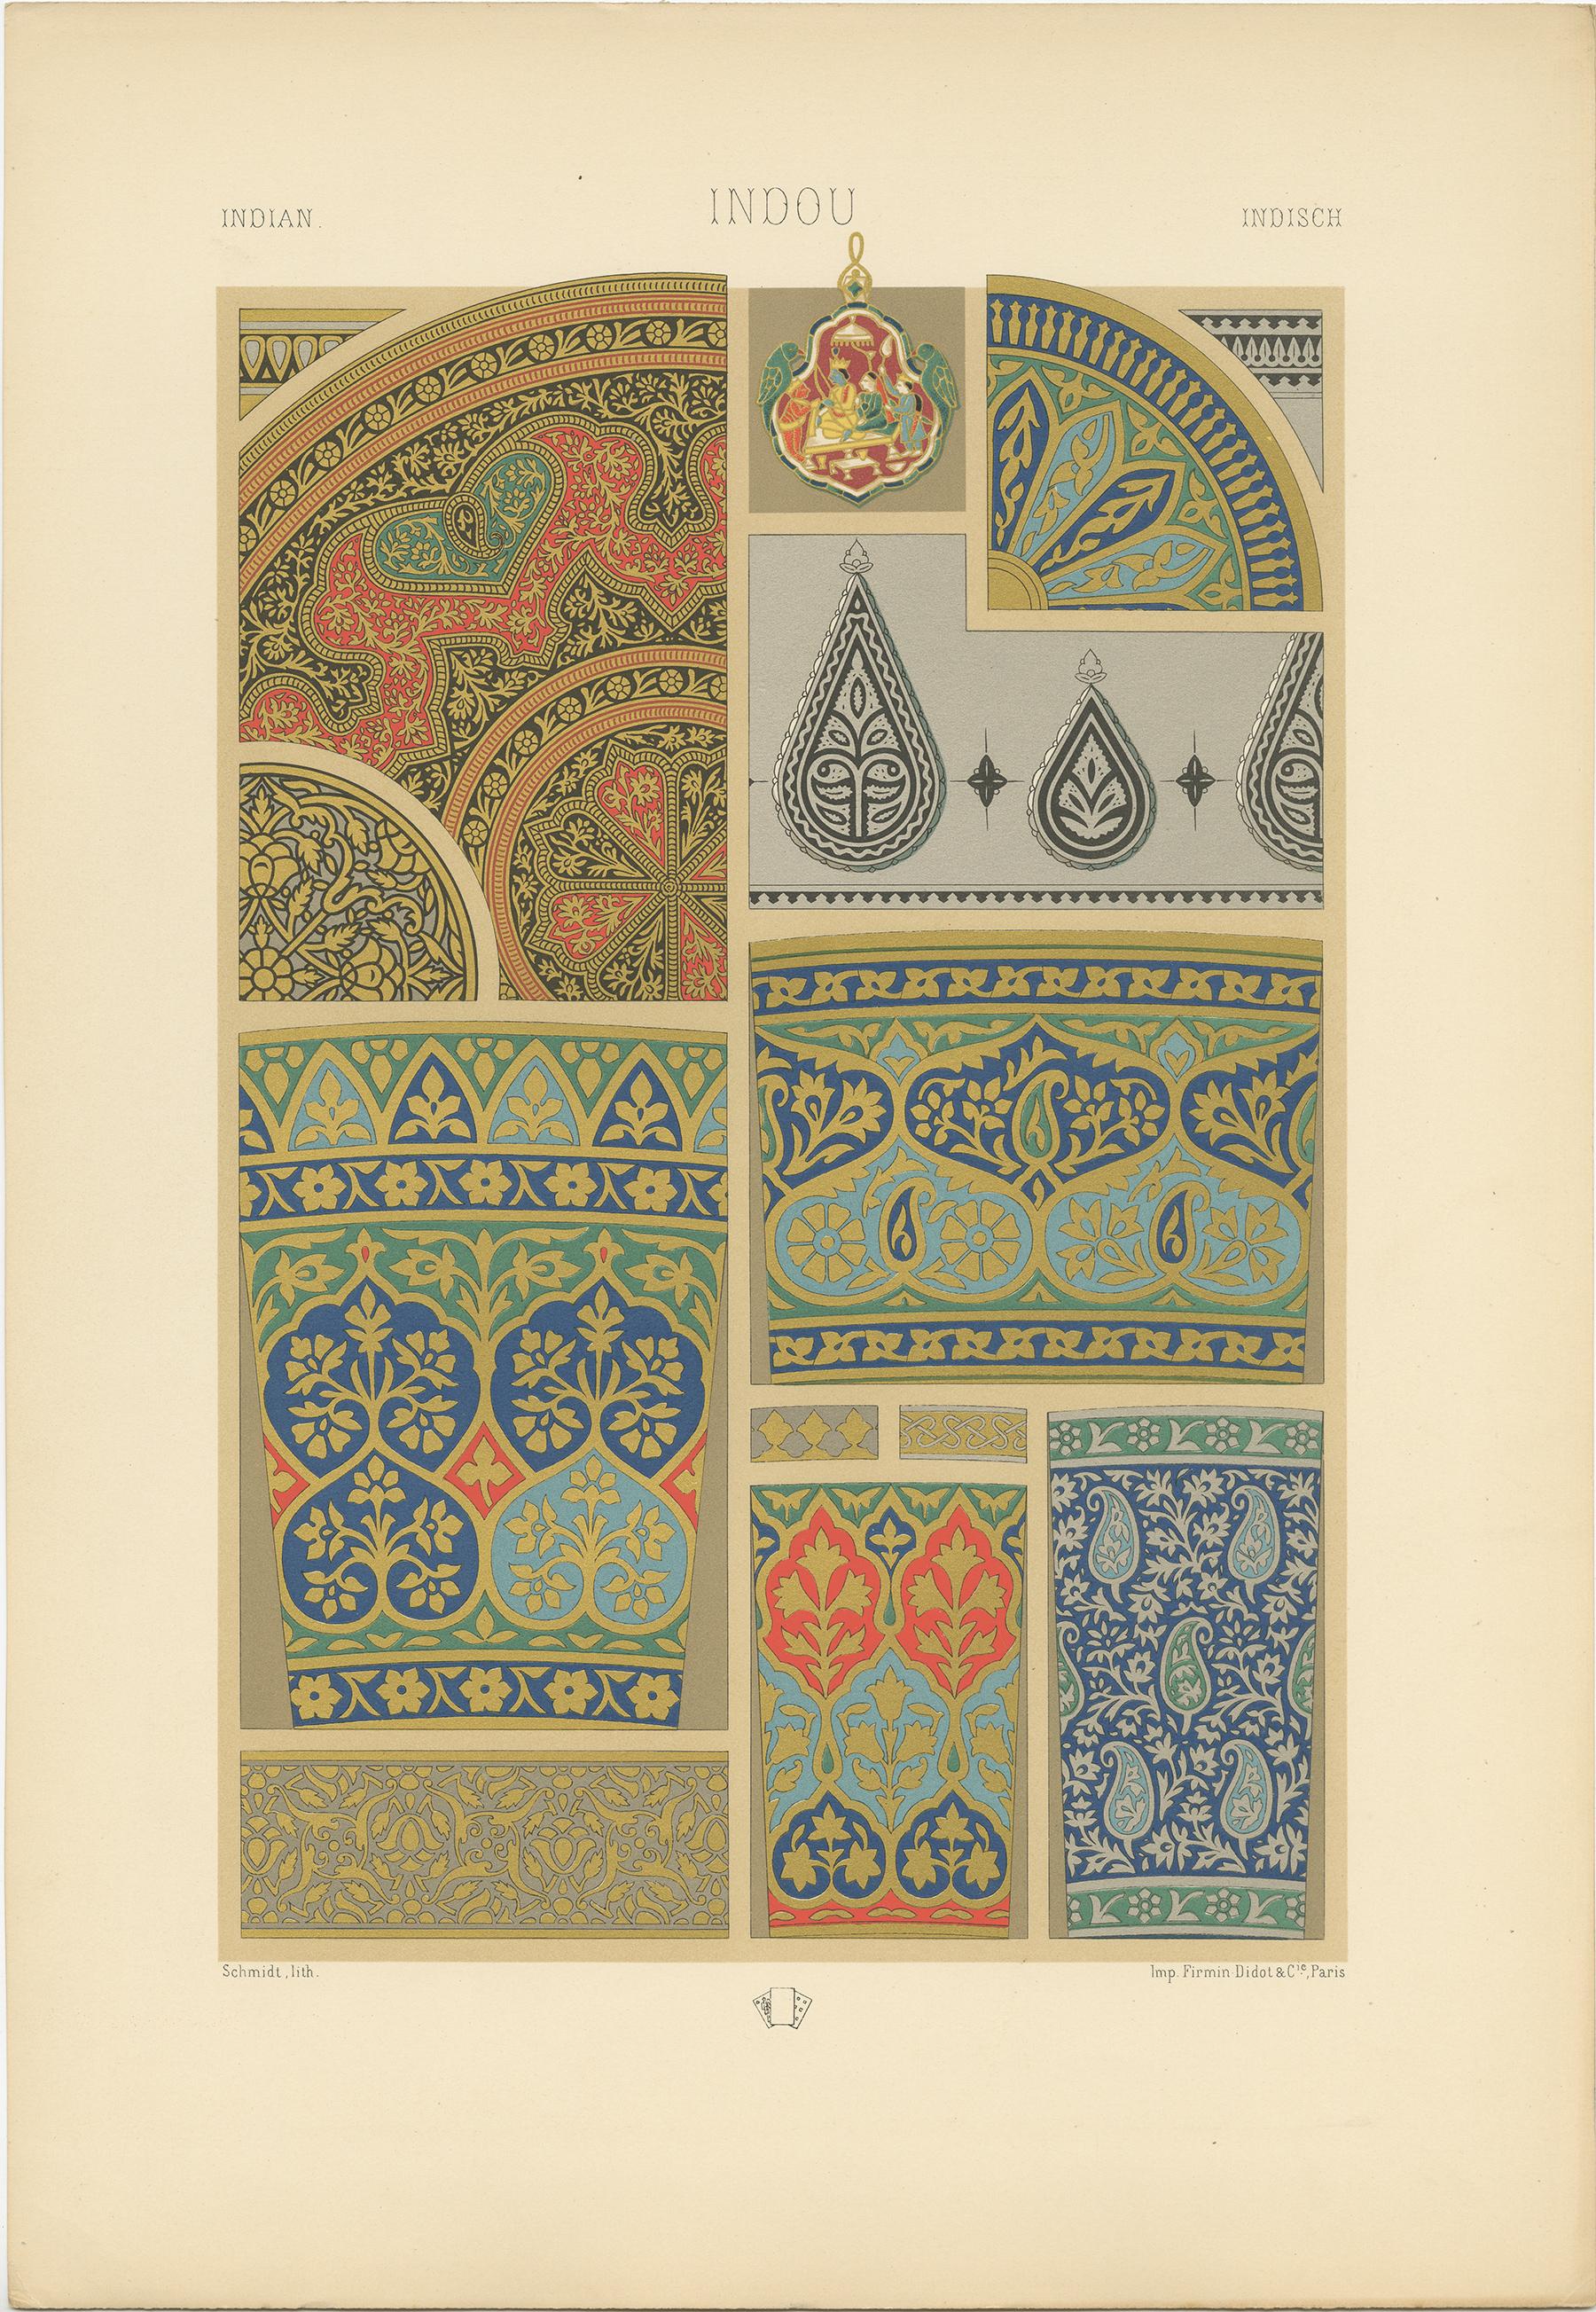 Antique print titled 'Indian - Indou - Indisch'. Chromolithograph of Indian enamels, cloisonné niello and chased steel from Kashmir and the north ornaments. This print originates from 'l'Ornement Polychrome' by Auguste Racinet. Published circa 1890.